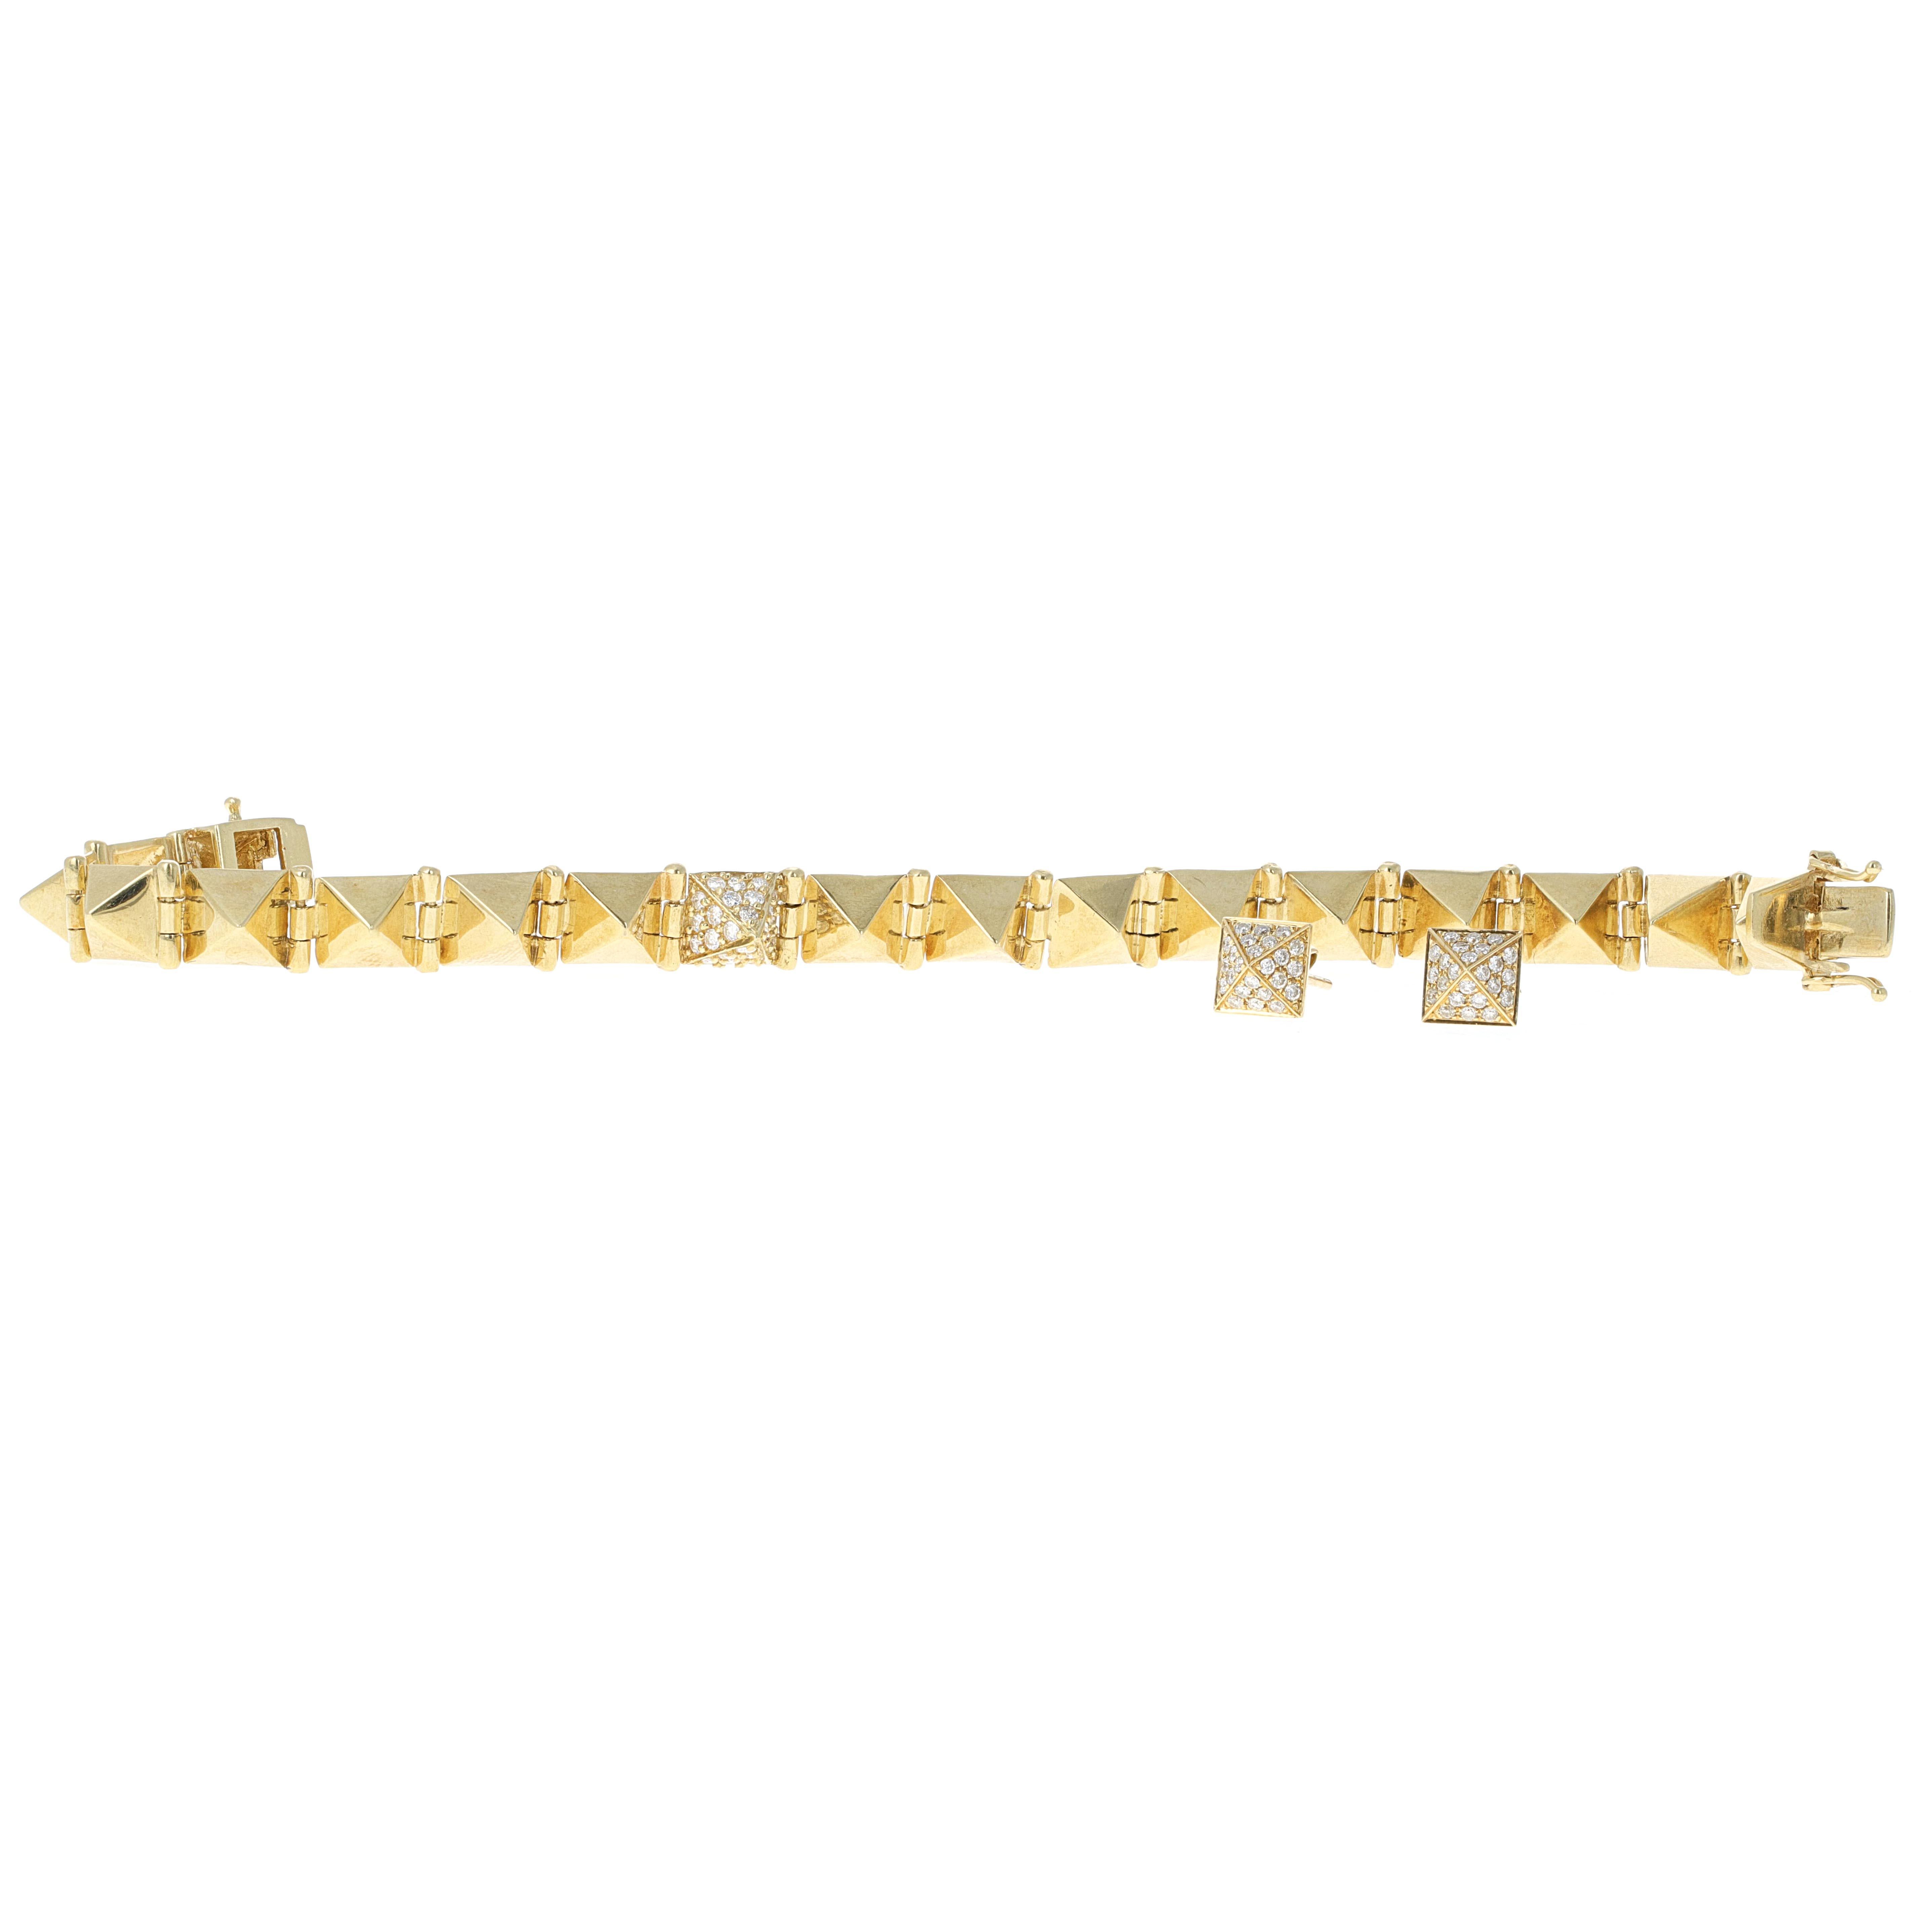 Authentic Anita Ko 18 karat yellow gold spike diamond bracelet and earrings set. The yellow gold spike bracelet has a center spike with micro pave white round diamonds. The earrings are spike studs that match the center link on the bracelet. They